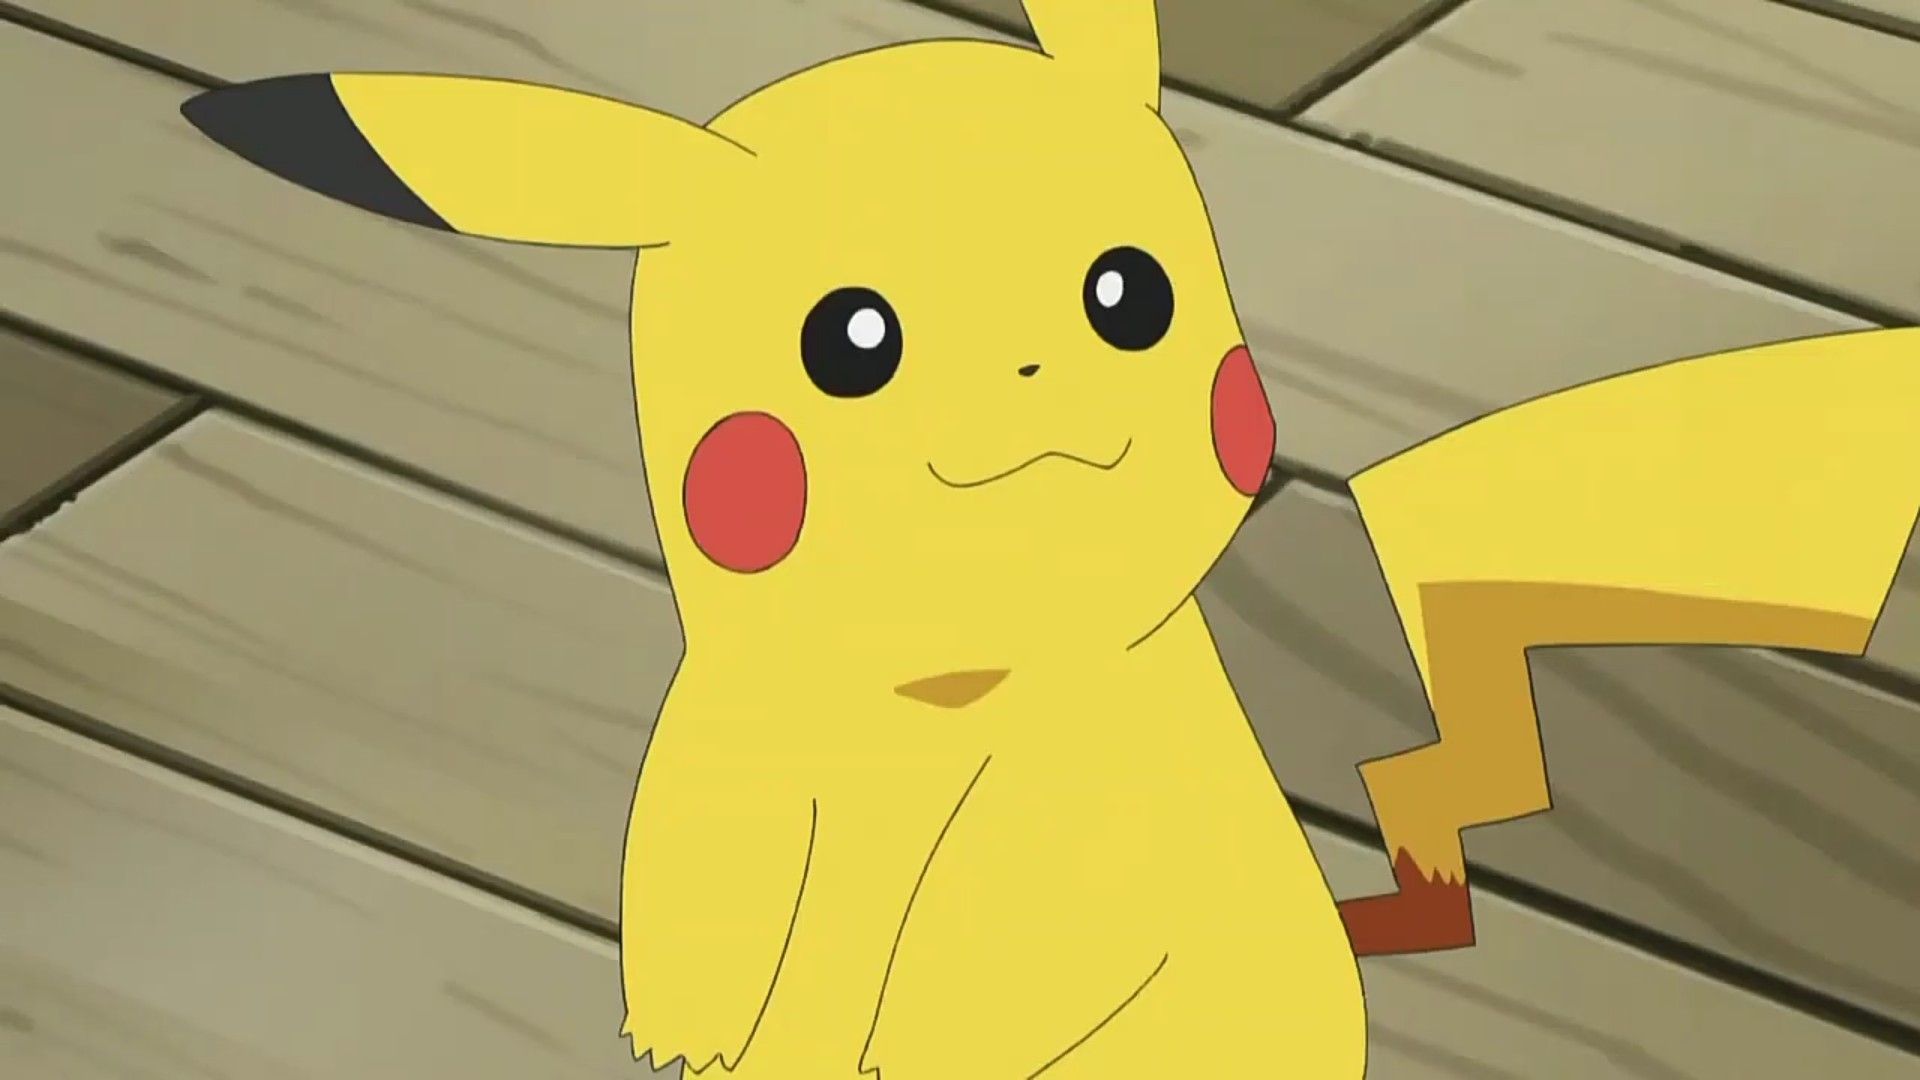 Does Pikachu Ever Have a Black Tail? Answered